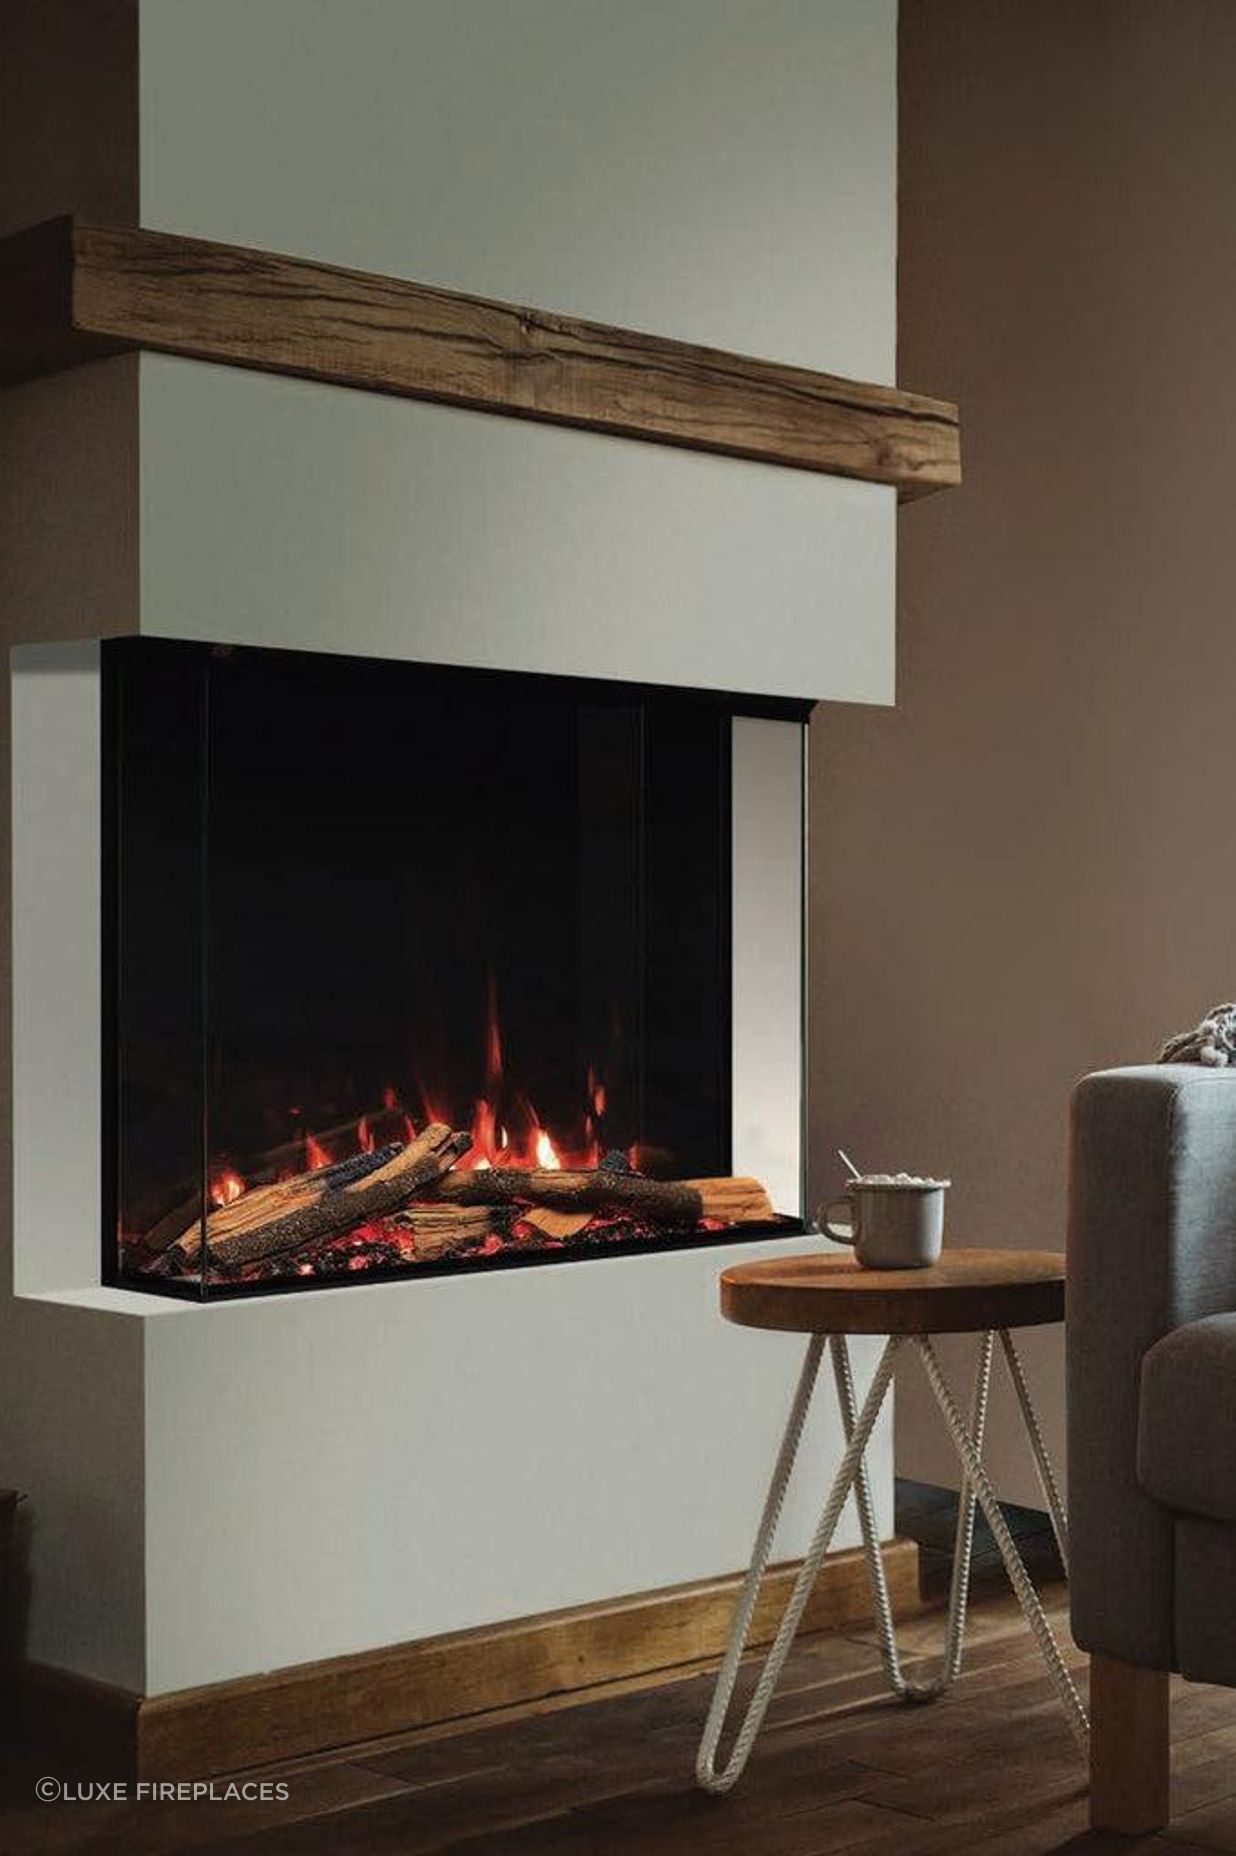 The Rinnai ES750 Sided Electric Fireplace features an innovative cool-to-touch technology, keeping the exterior safe to touch, even when heating.